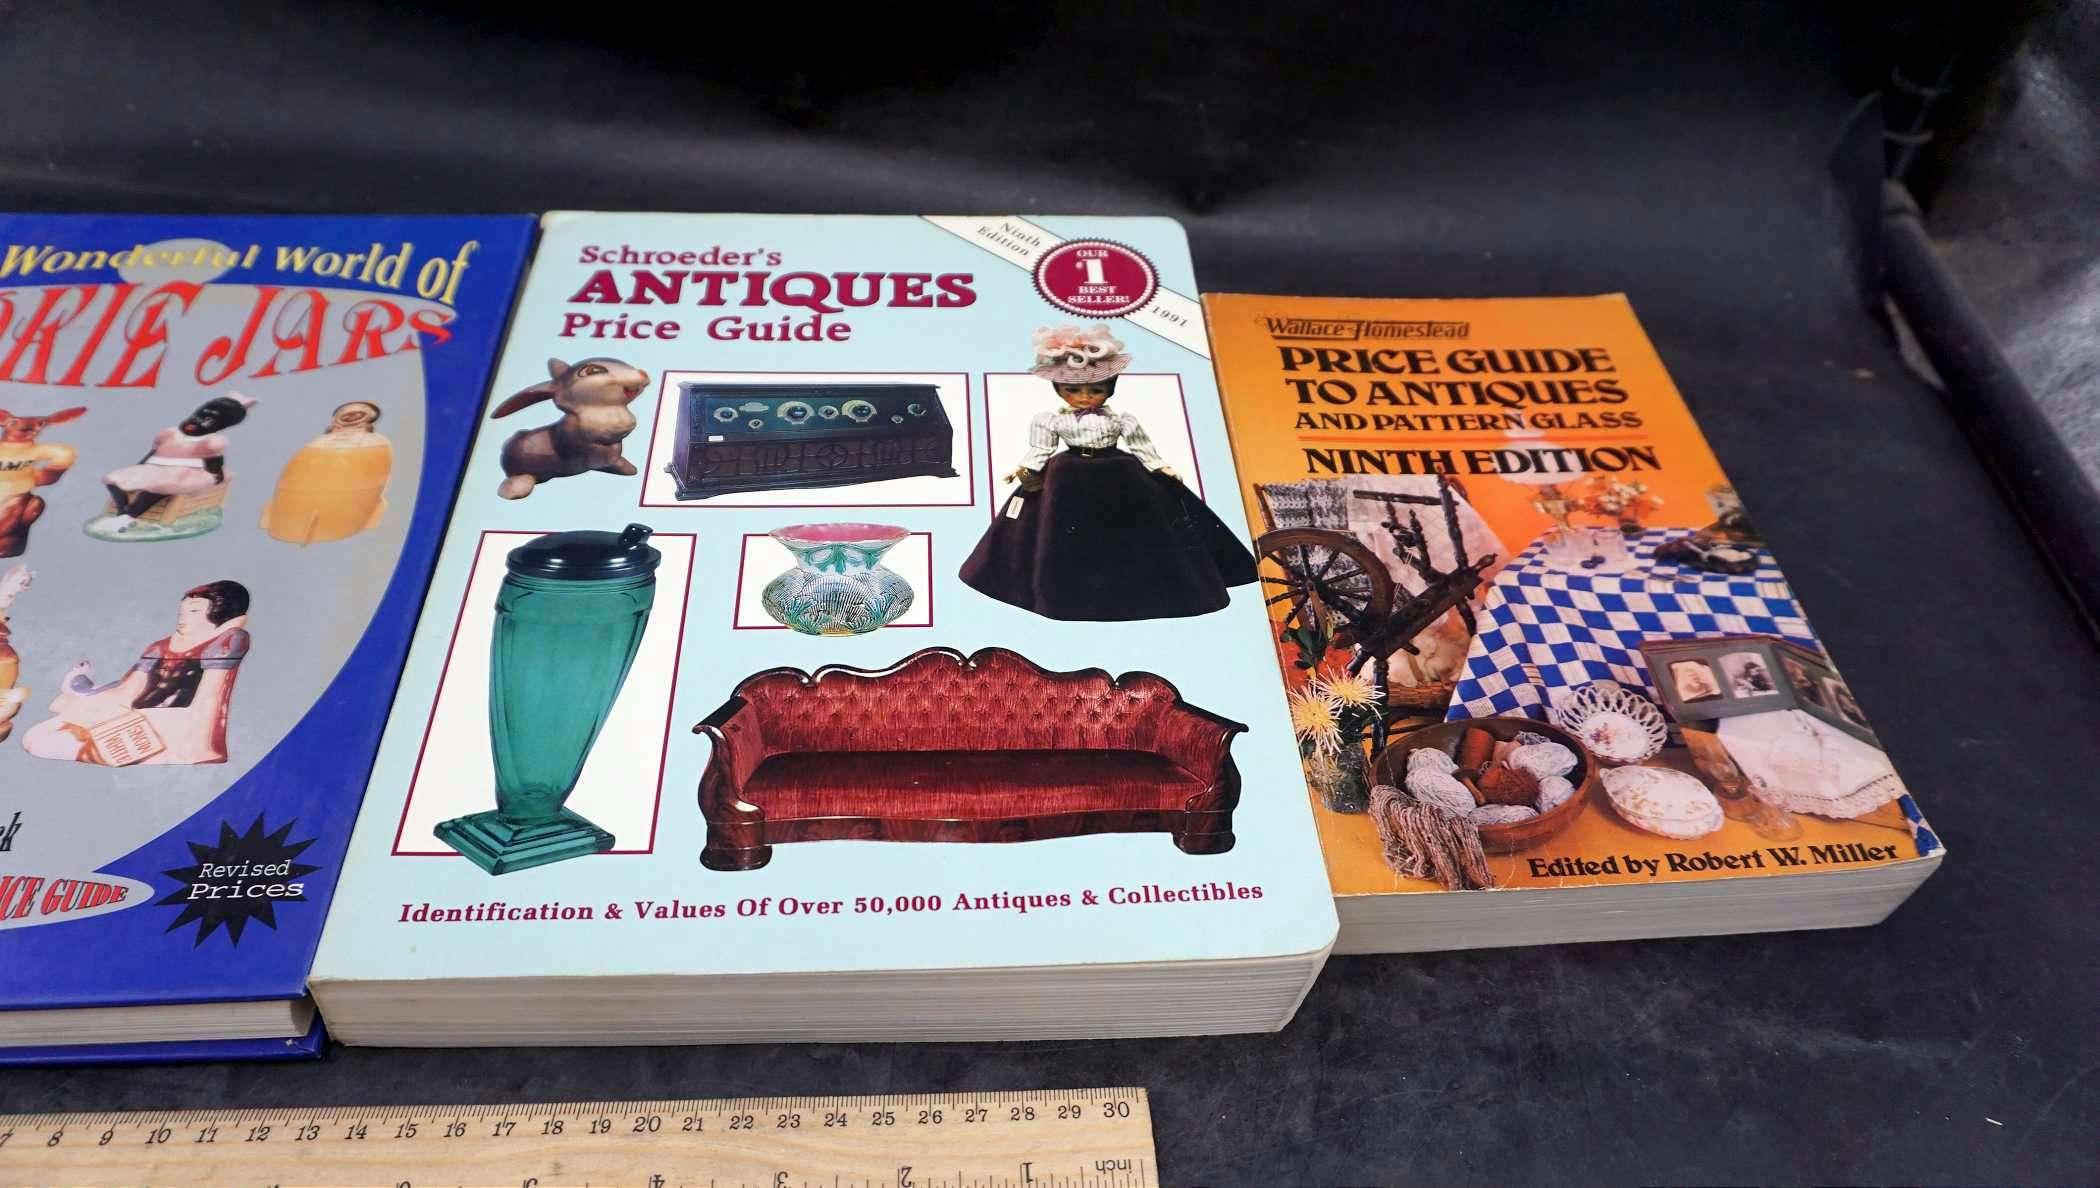 3 Books - Cookie Jars, Antiques Price Guide & Price Guide To Antiques